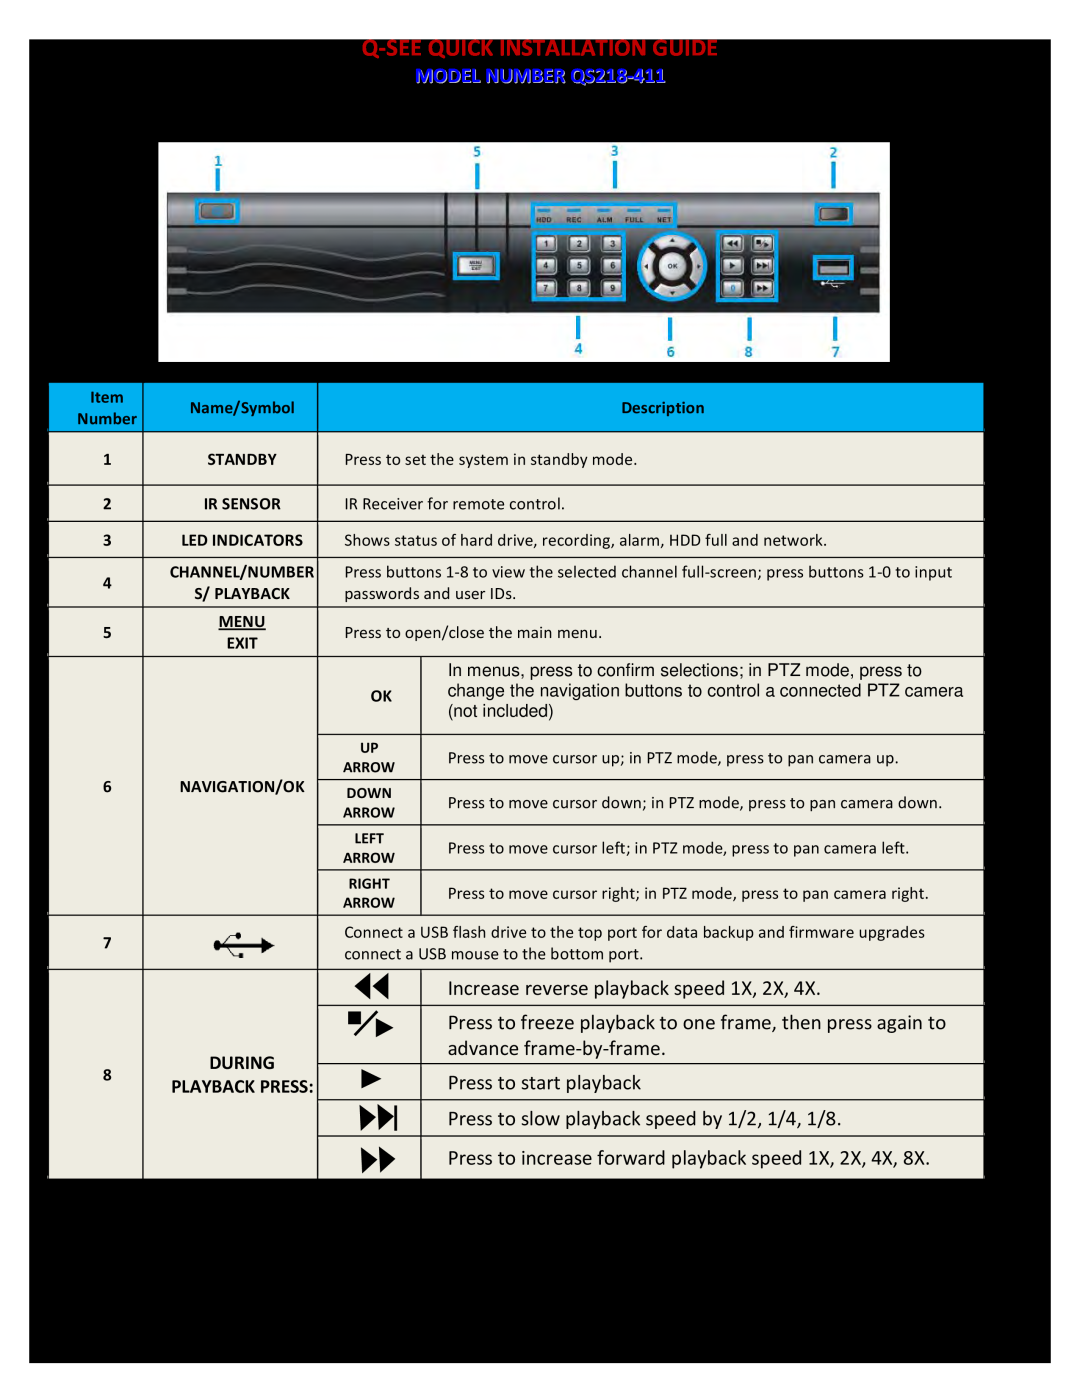 Q-See QS218-811 PART 5 - DVR CONTROLS FRONT PANEL, Increase reverse playback speed, advance frame-by-frame, Playback Press 